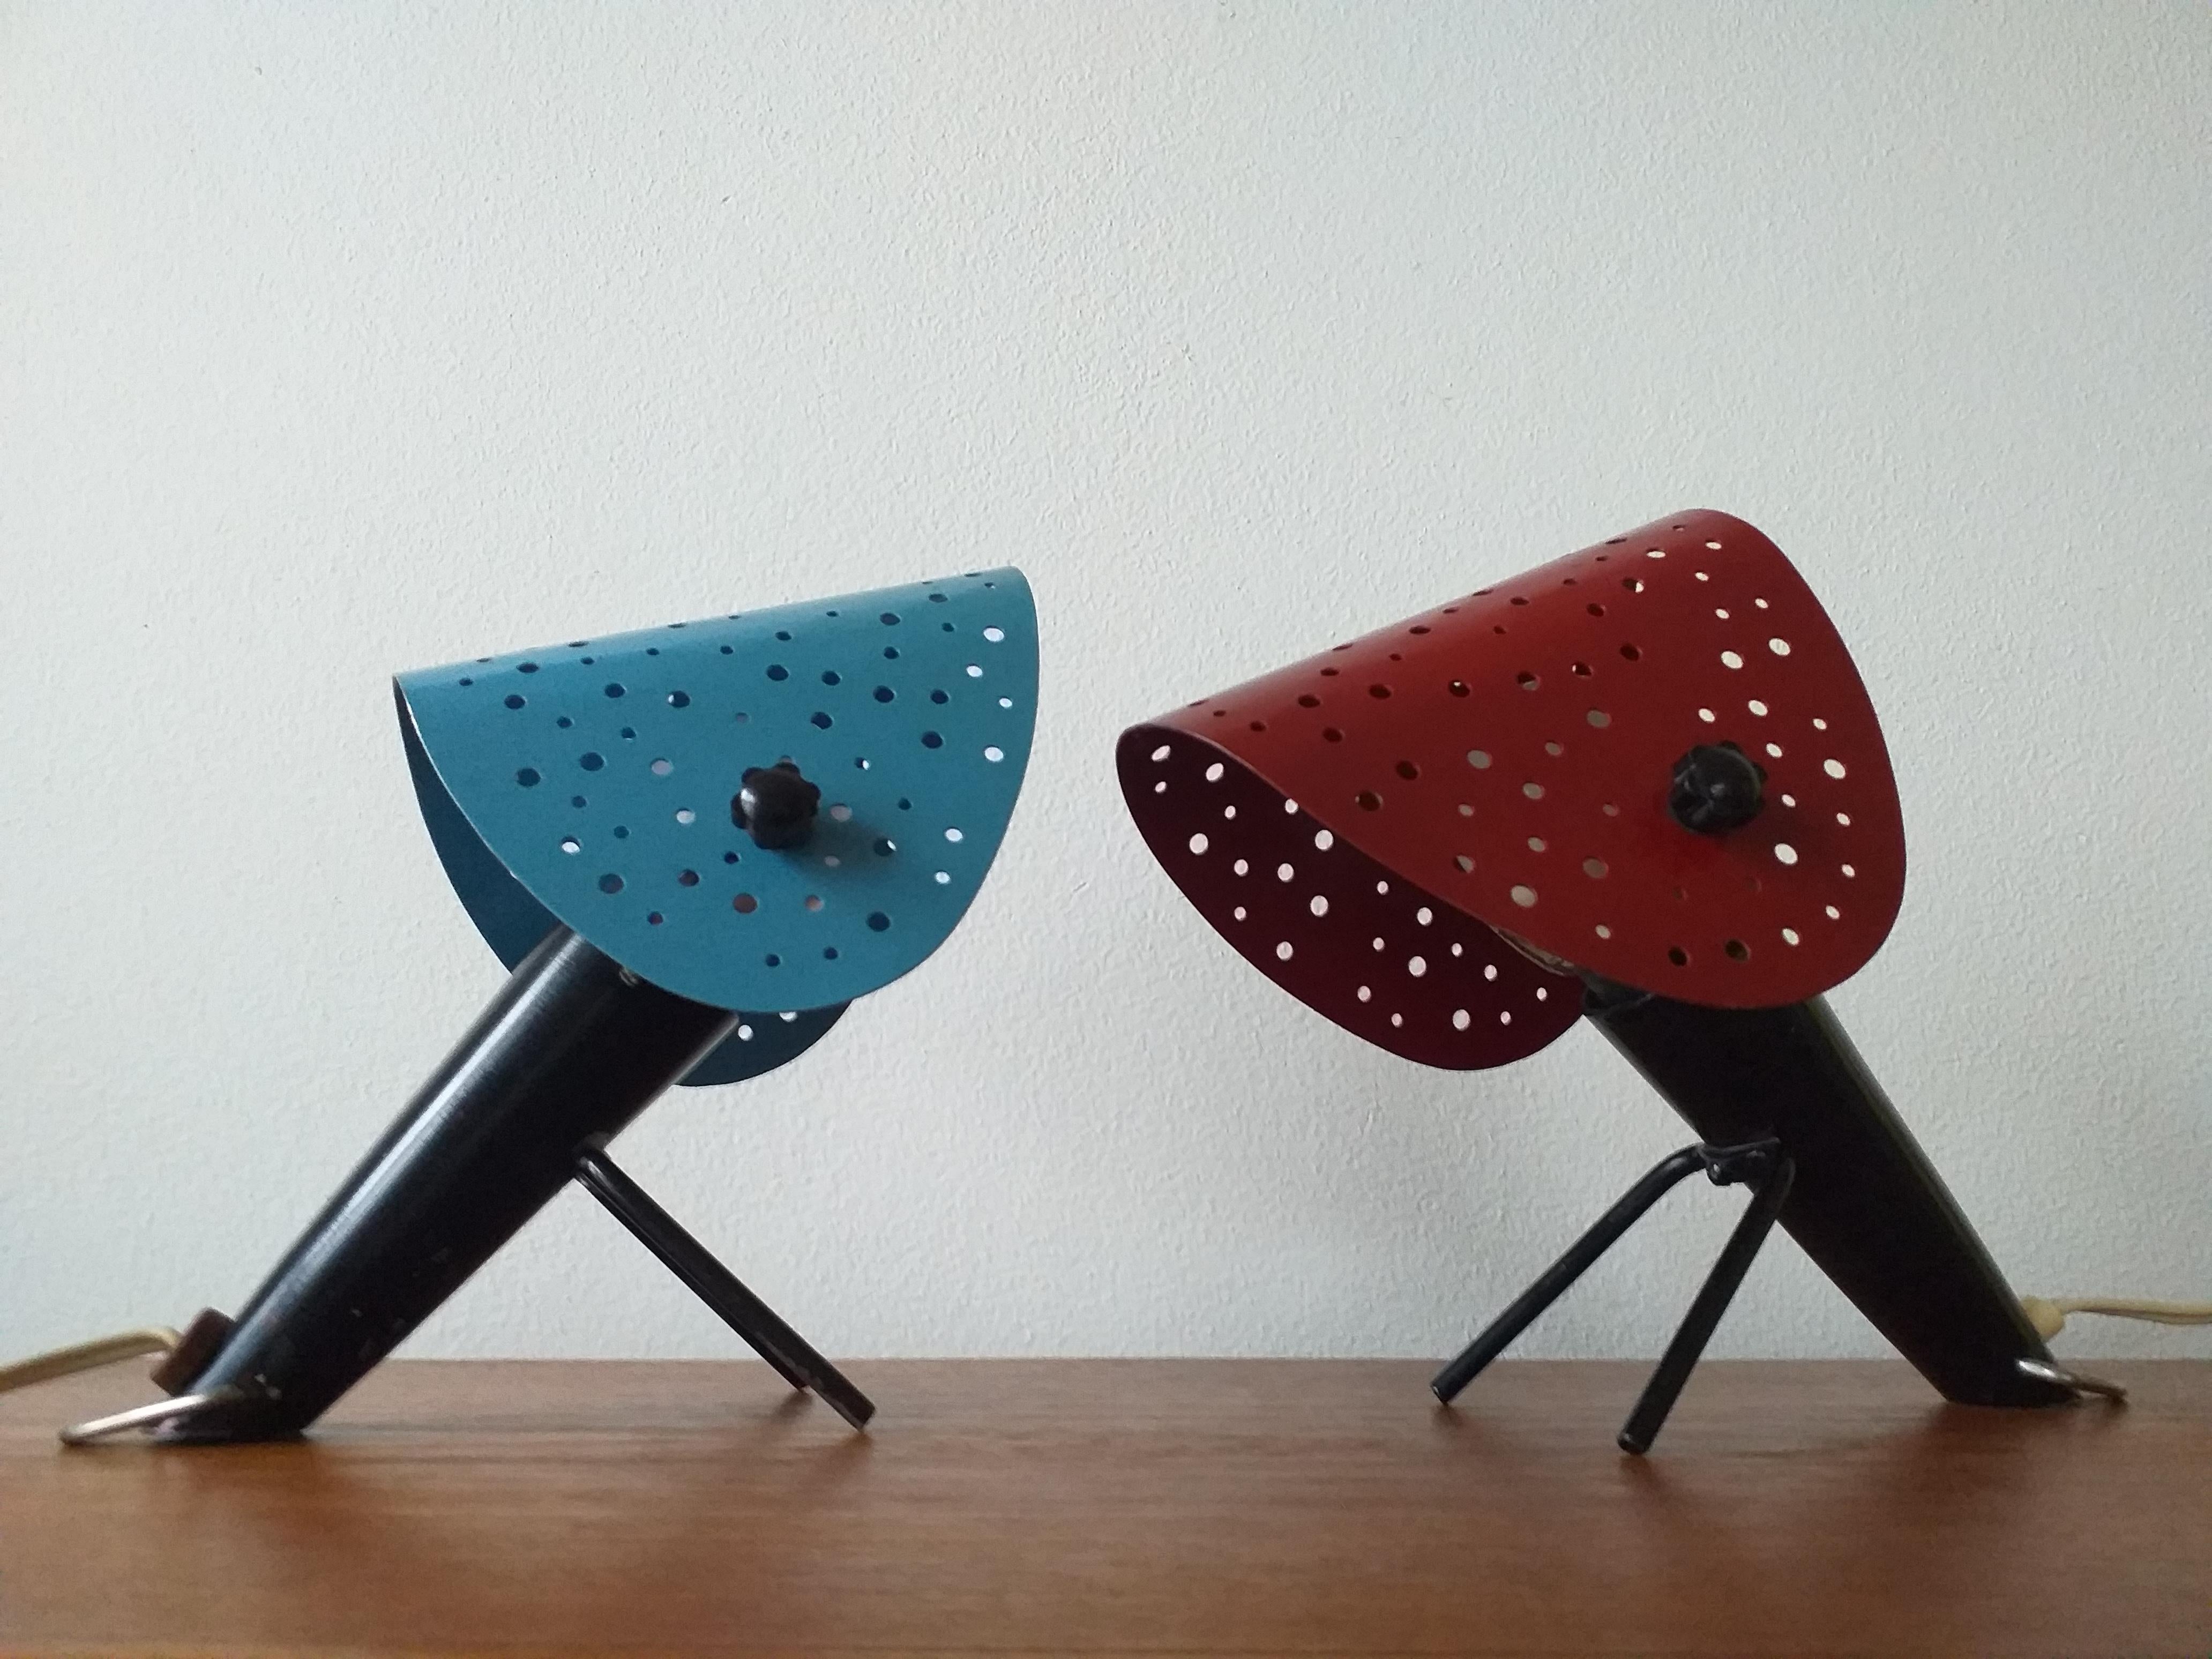 German Pair of Midcentury Table Lamps by Ernst Igl for Hillebrand, 1950s For Sale